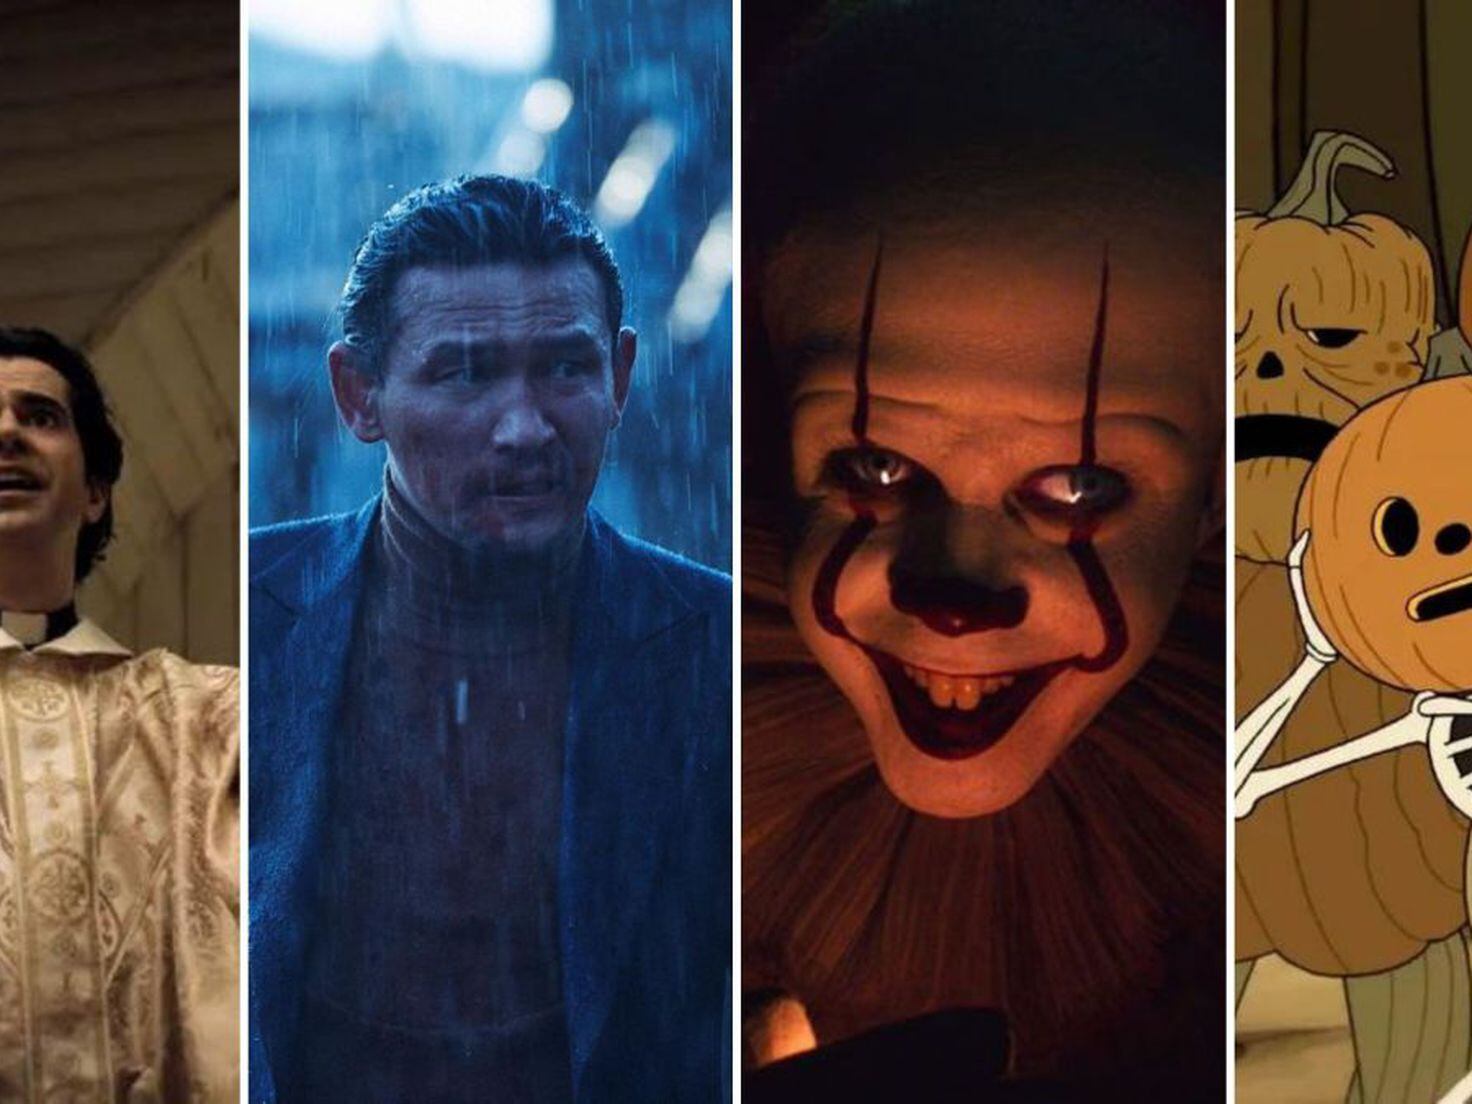 Netflix New Halloween Movies for Kids and Family - Williamson Source